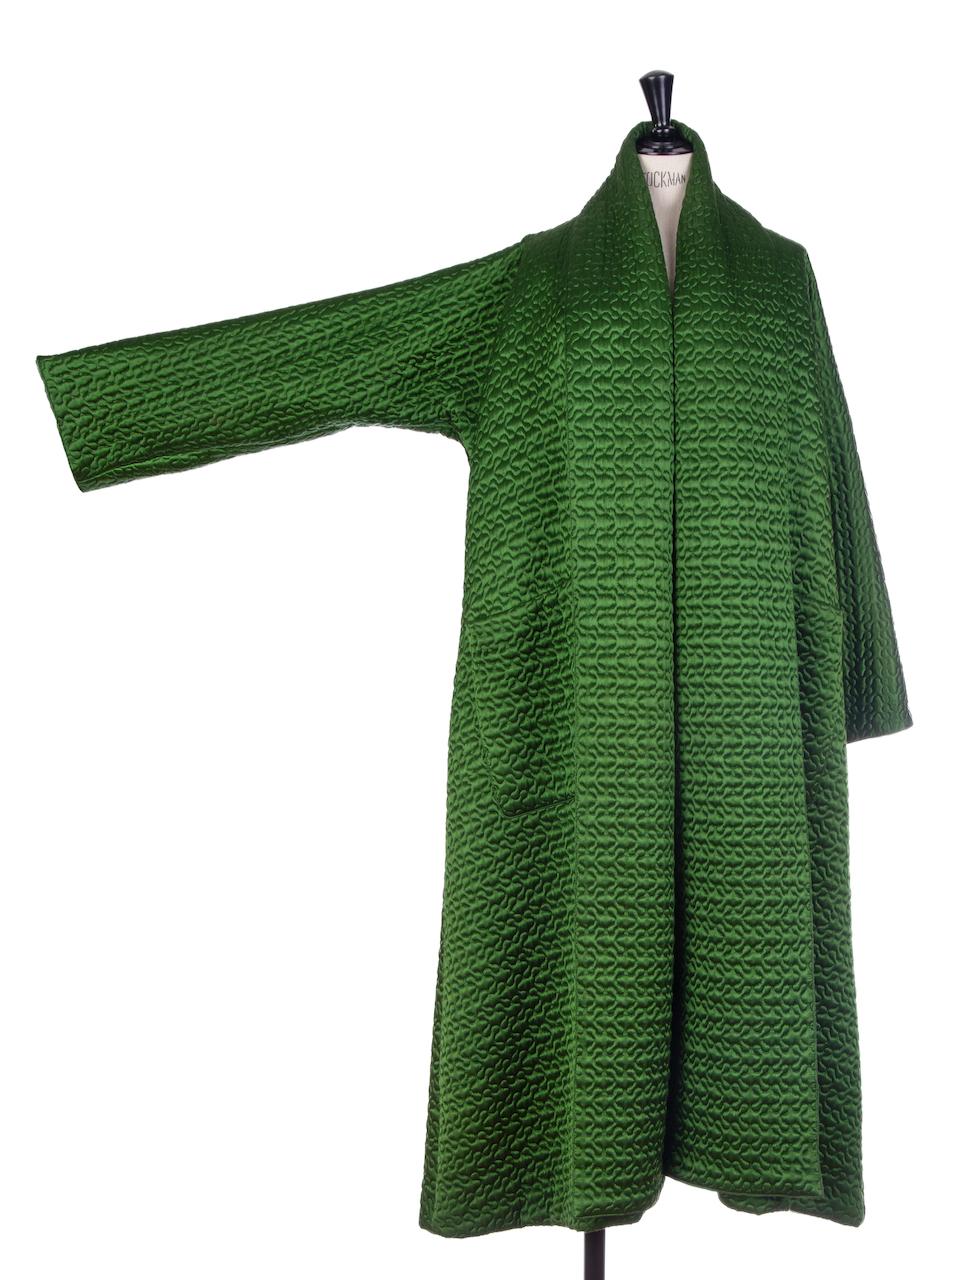 JEAN PAUL GAULTIER A/W 1985-1986 Green Quilted & Padded Satin Coat For Sale 7